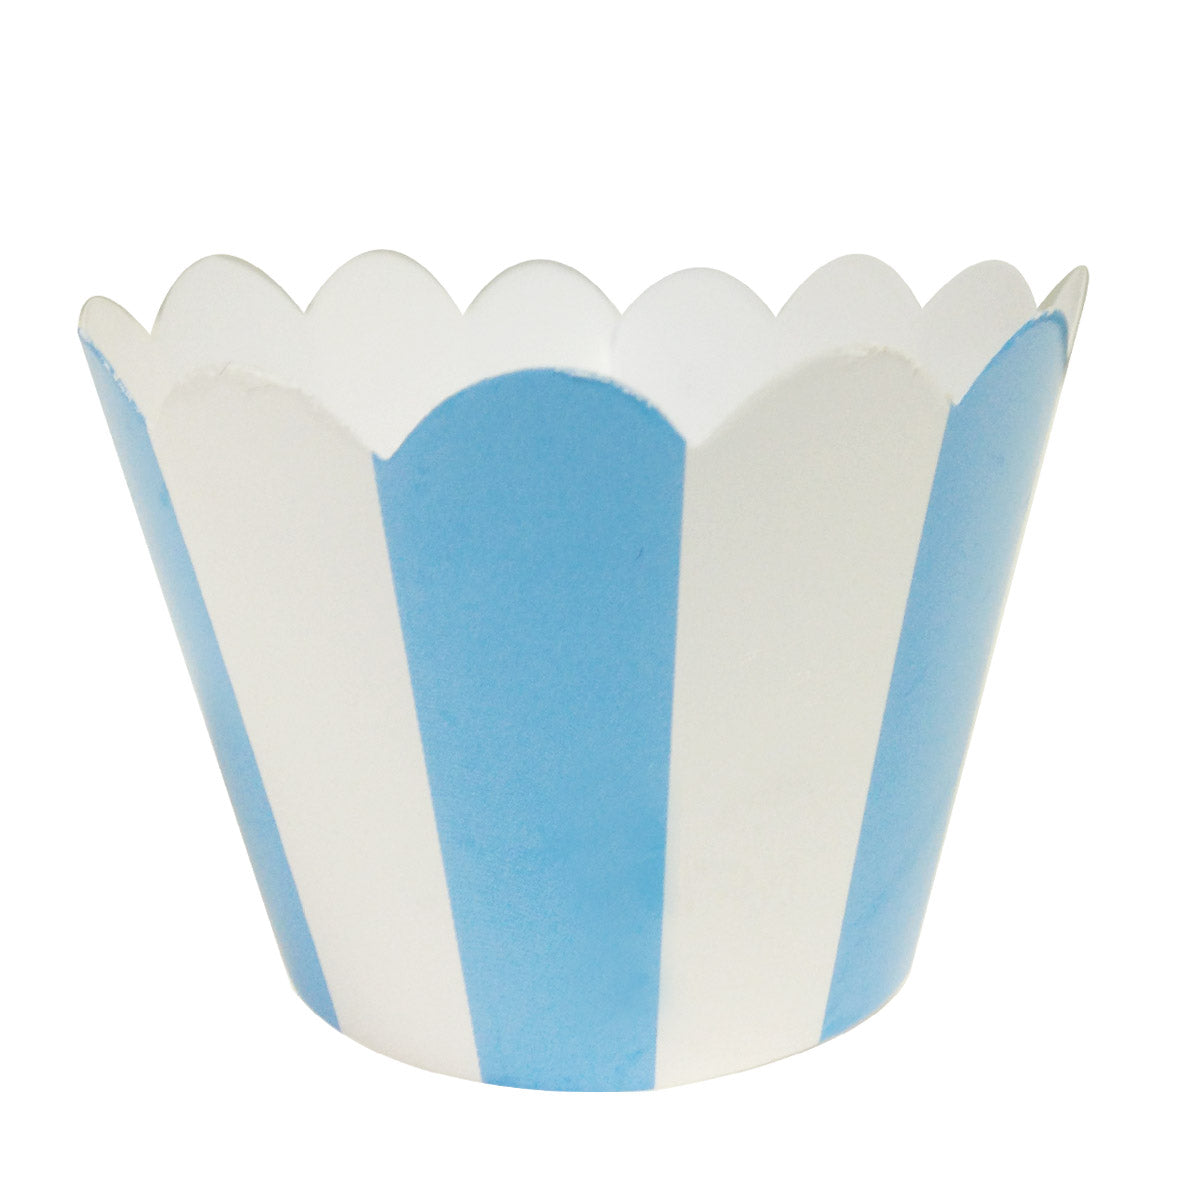 White Cupcake Liners - The Peppermill